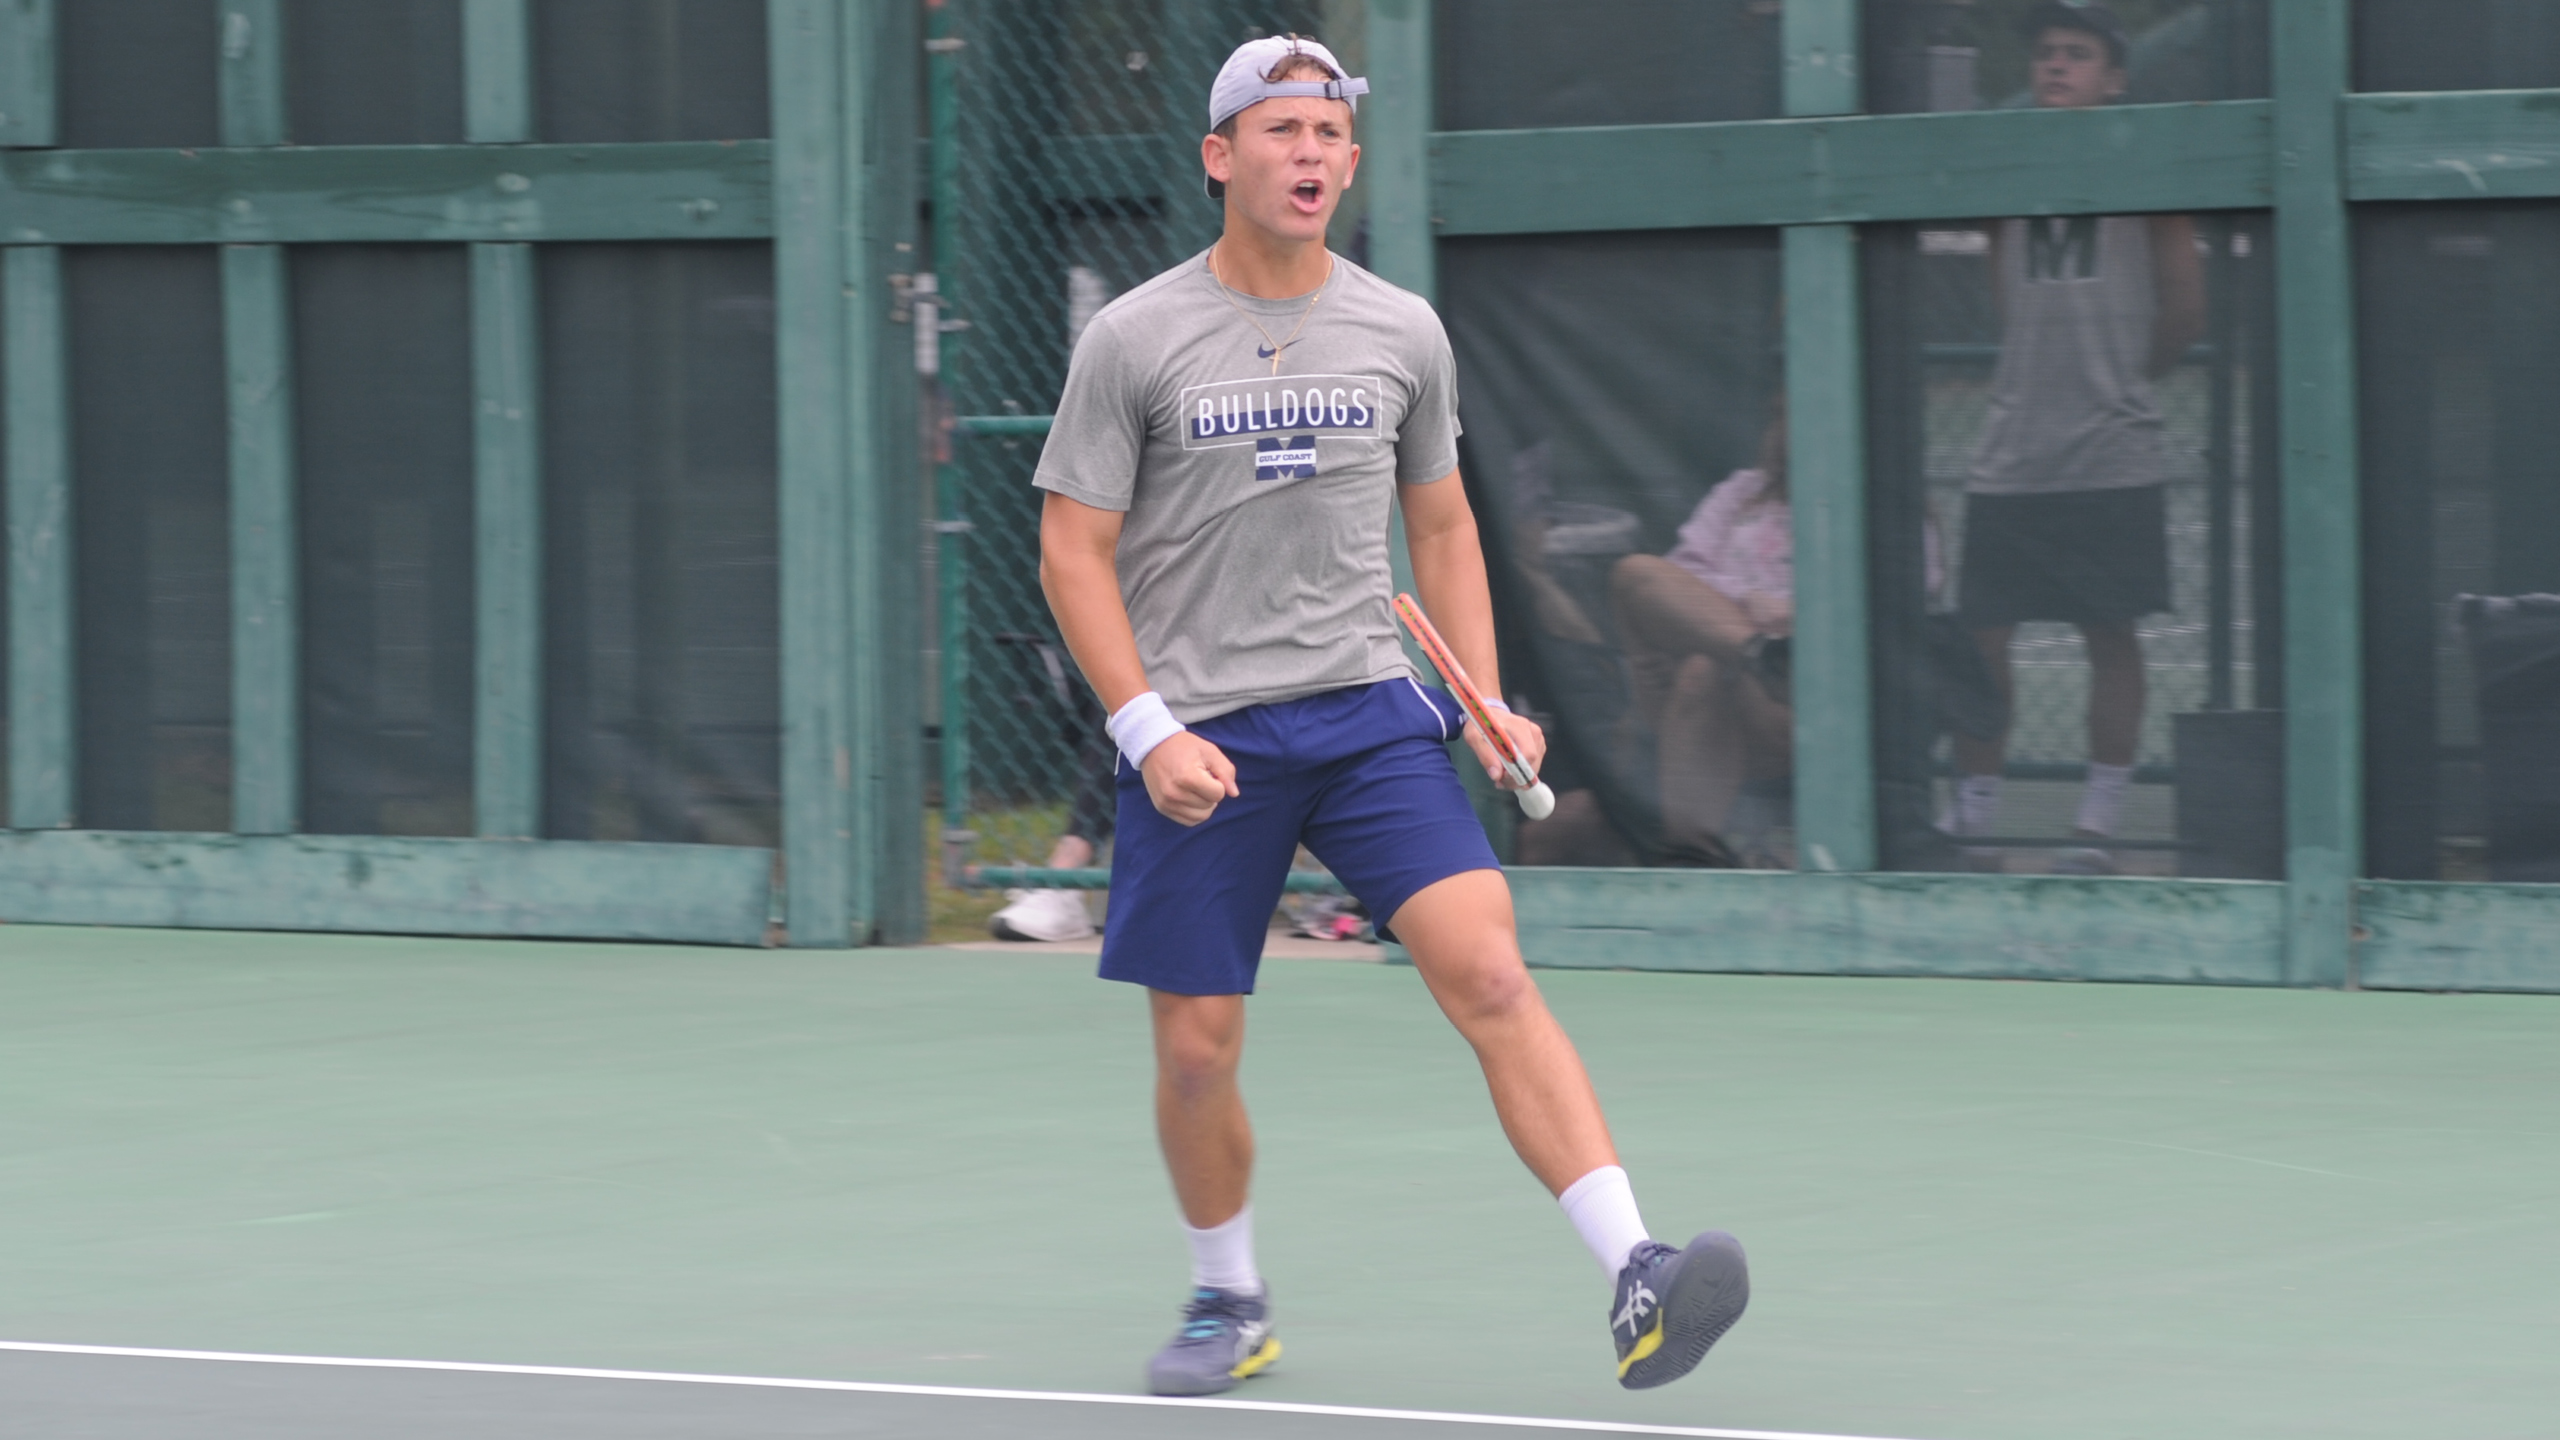 No. 15 Men’s Tennis clinches trip to nationals